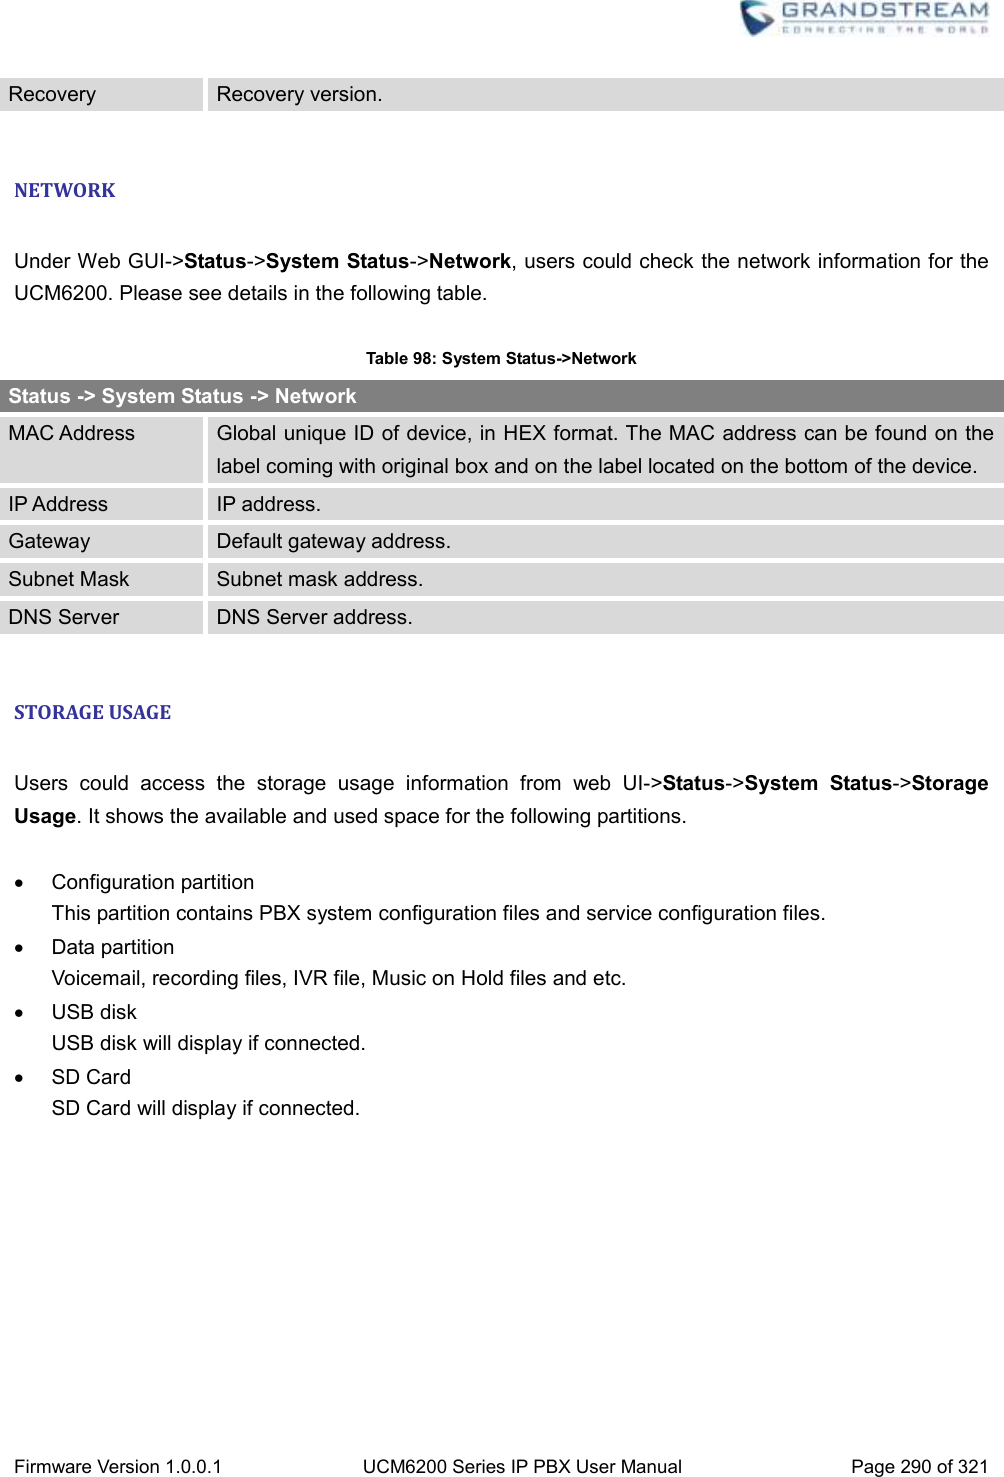  Firmware Version 1.0.0.1 UCM6200 Series IP PBX User Manual Page 290 of 321    Recovery Recovery version.  NETWORK  Under Web GUI-&gt;Status-&gt;System Status-&gt;Network, users could check the network information for the UCM6200. Please see details in the following table.  Table 98: System Status-&gt;Network Status -&gt; System Status -&gt; Network MAC Address Global unique ID of device, in HEX format. The MAC address can be found on the label coming with original box and on the label located on the bottom of the device. IP Address IP address. Gateway Default gateway address. Subnet Mask Subnet mask address. DNS Server DNS Server address.  STORAGE USAGE  Users  could  access  the  storage  usage  information  from  web  UI-&gt;Status-&gt;System  Status-&gt;Storage Usage. It shows the available and used space for the following partitions.    Configuration partition This partition contains PBX system configuration files and service configuration files.   Data partition Voicemail, recording files, IVR file, Music on Hold files and etc.   USB disk USB disk will display if connected.   SD Card SD Card will display if connected. 